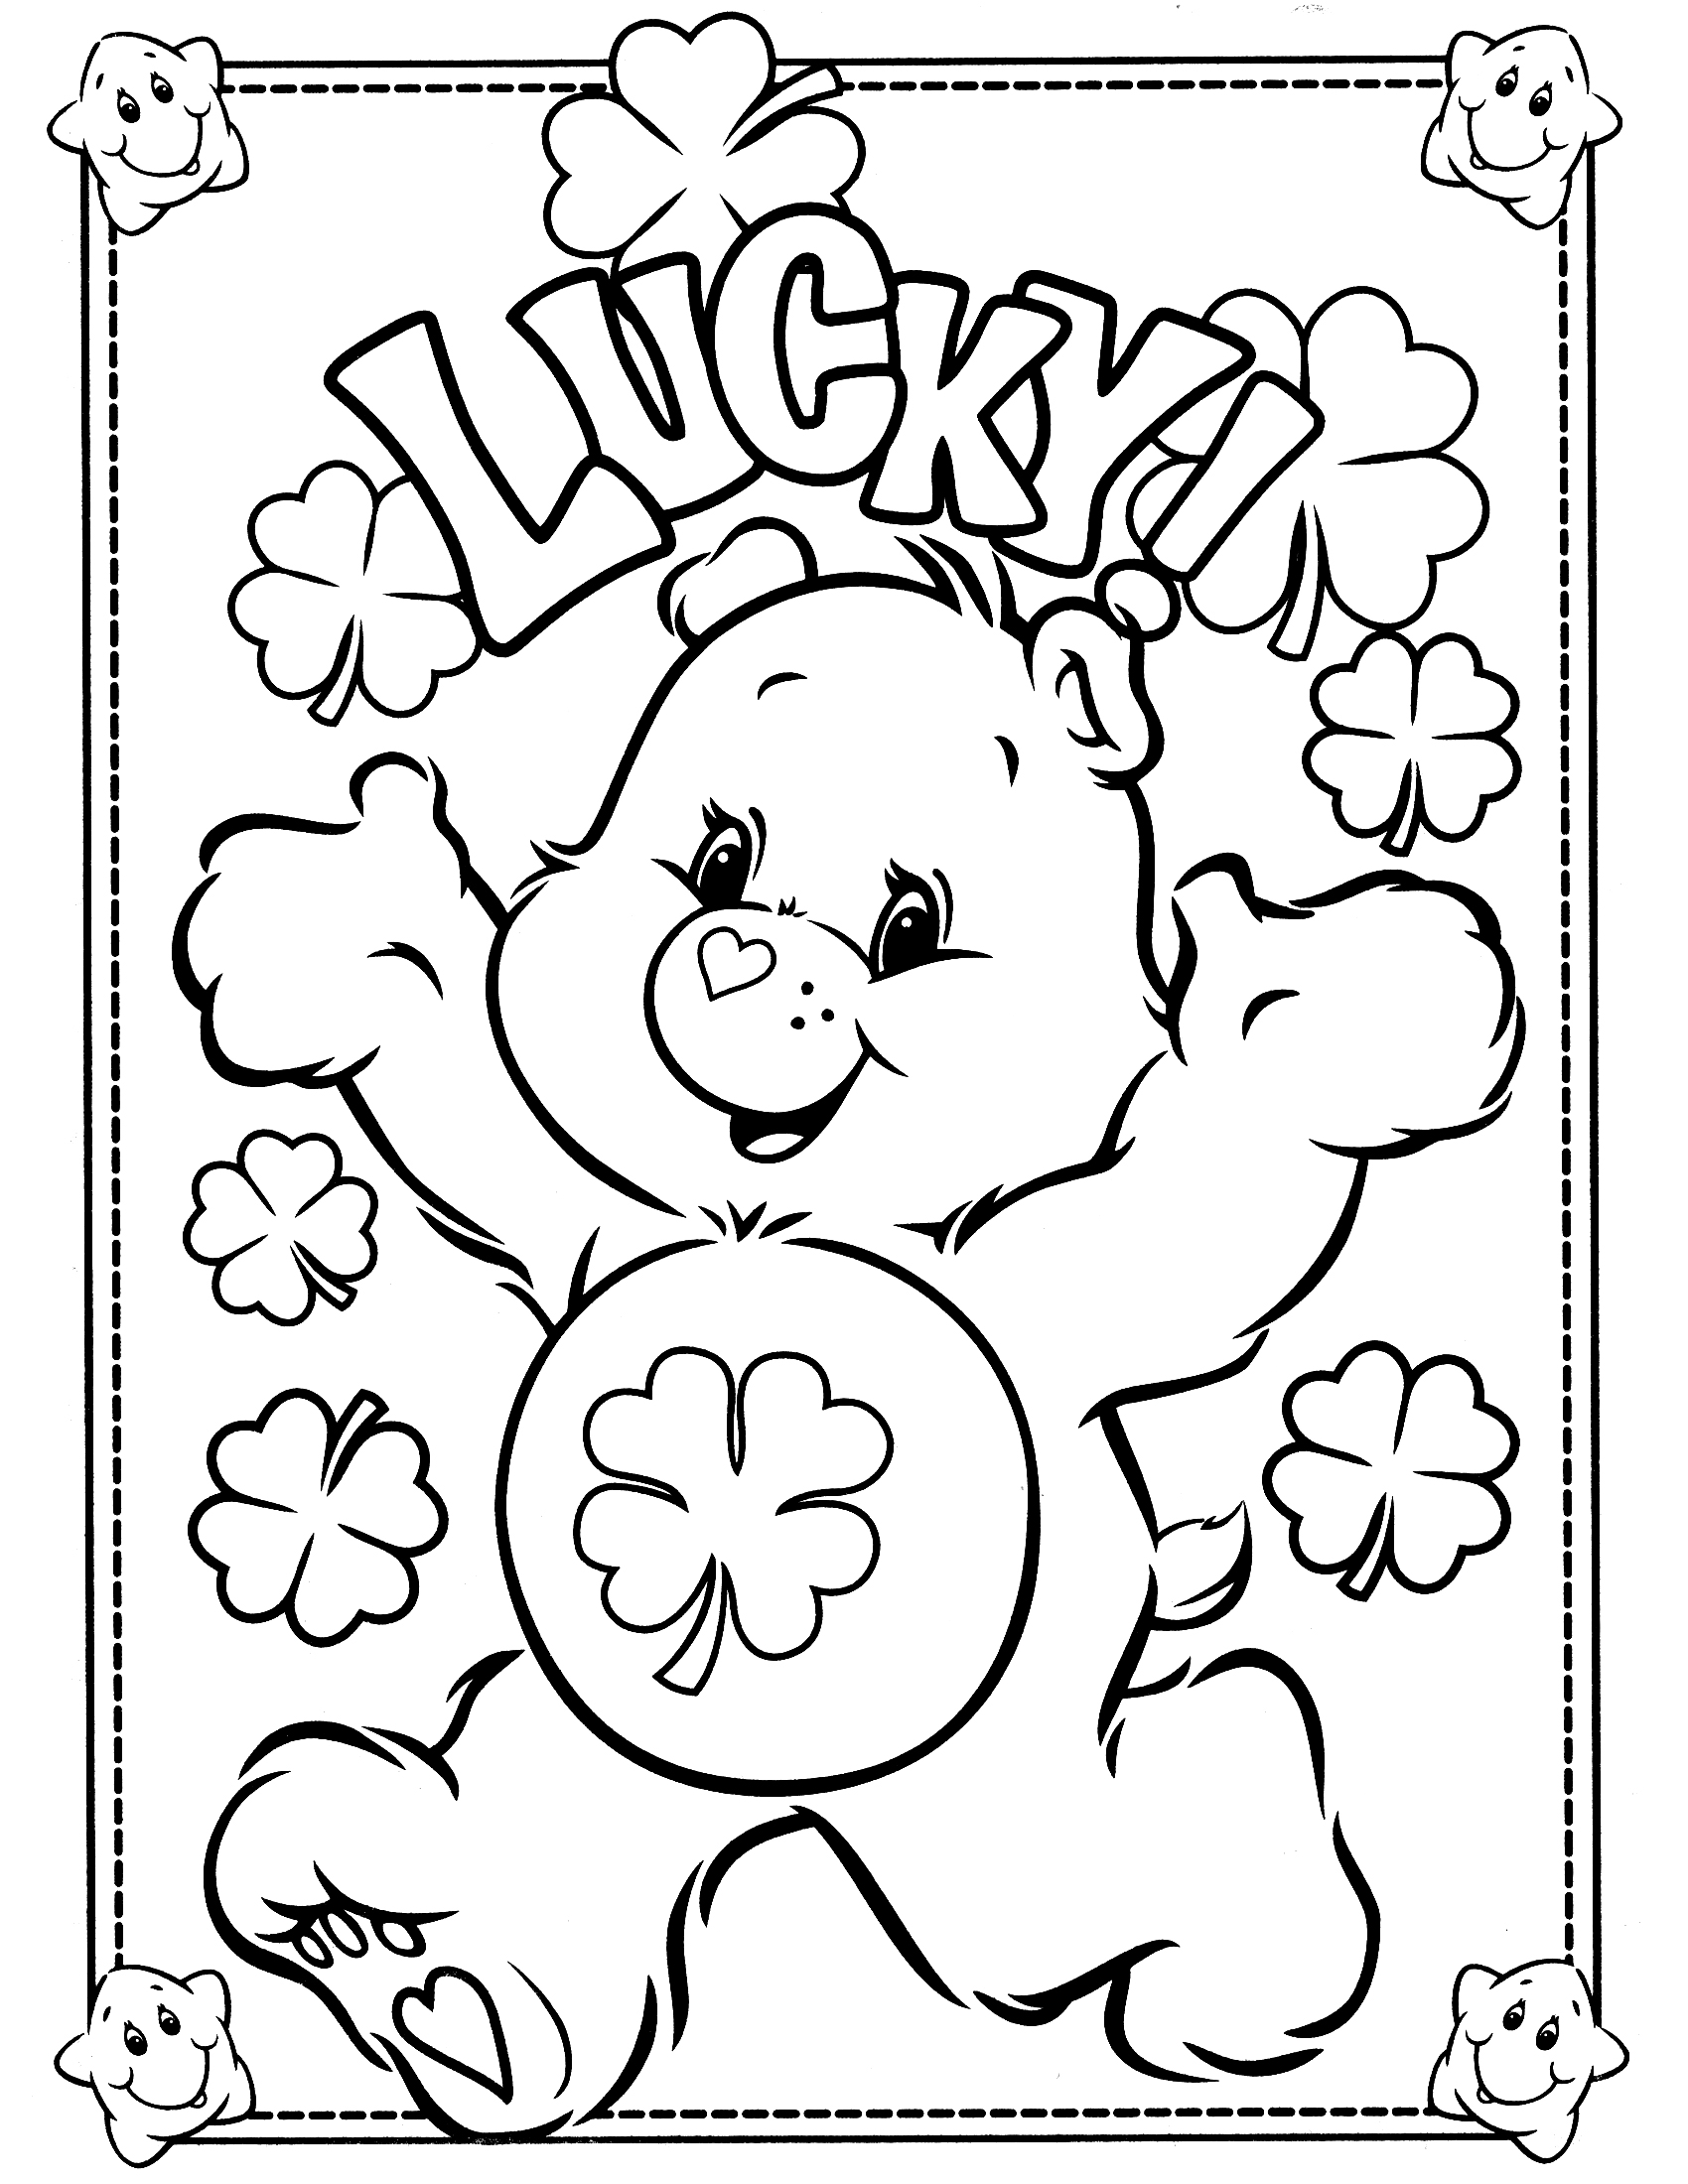 Care Bears Coloring Coloring Pages - Kidsuki